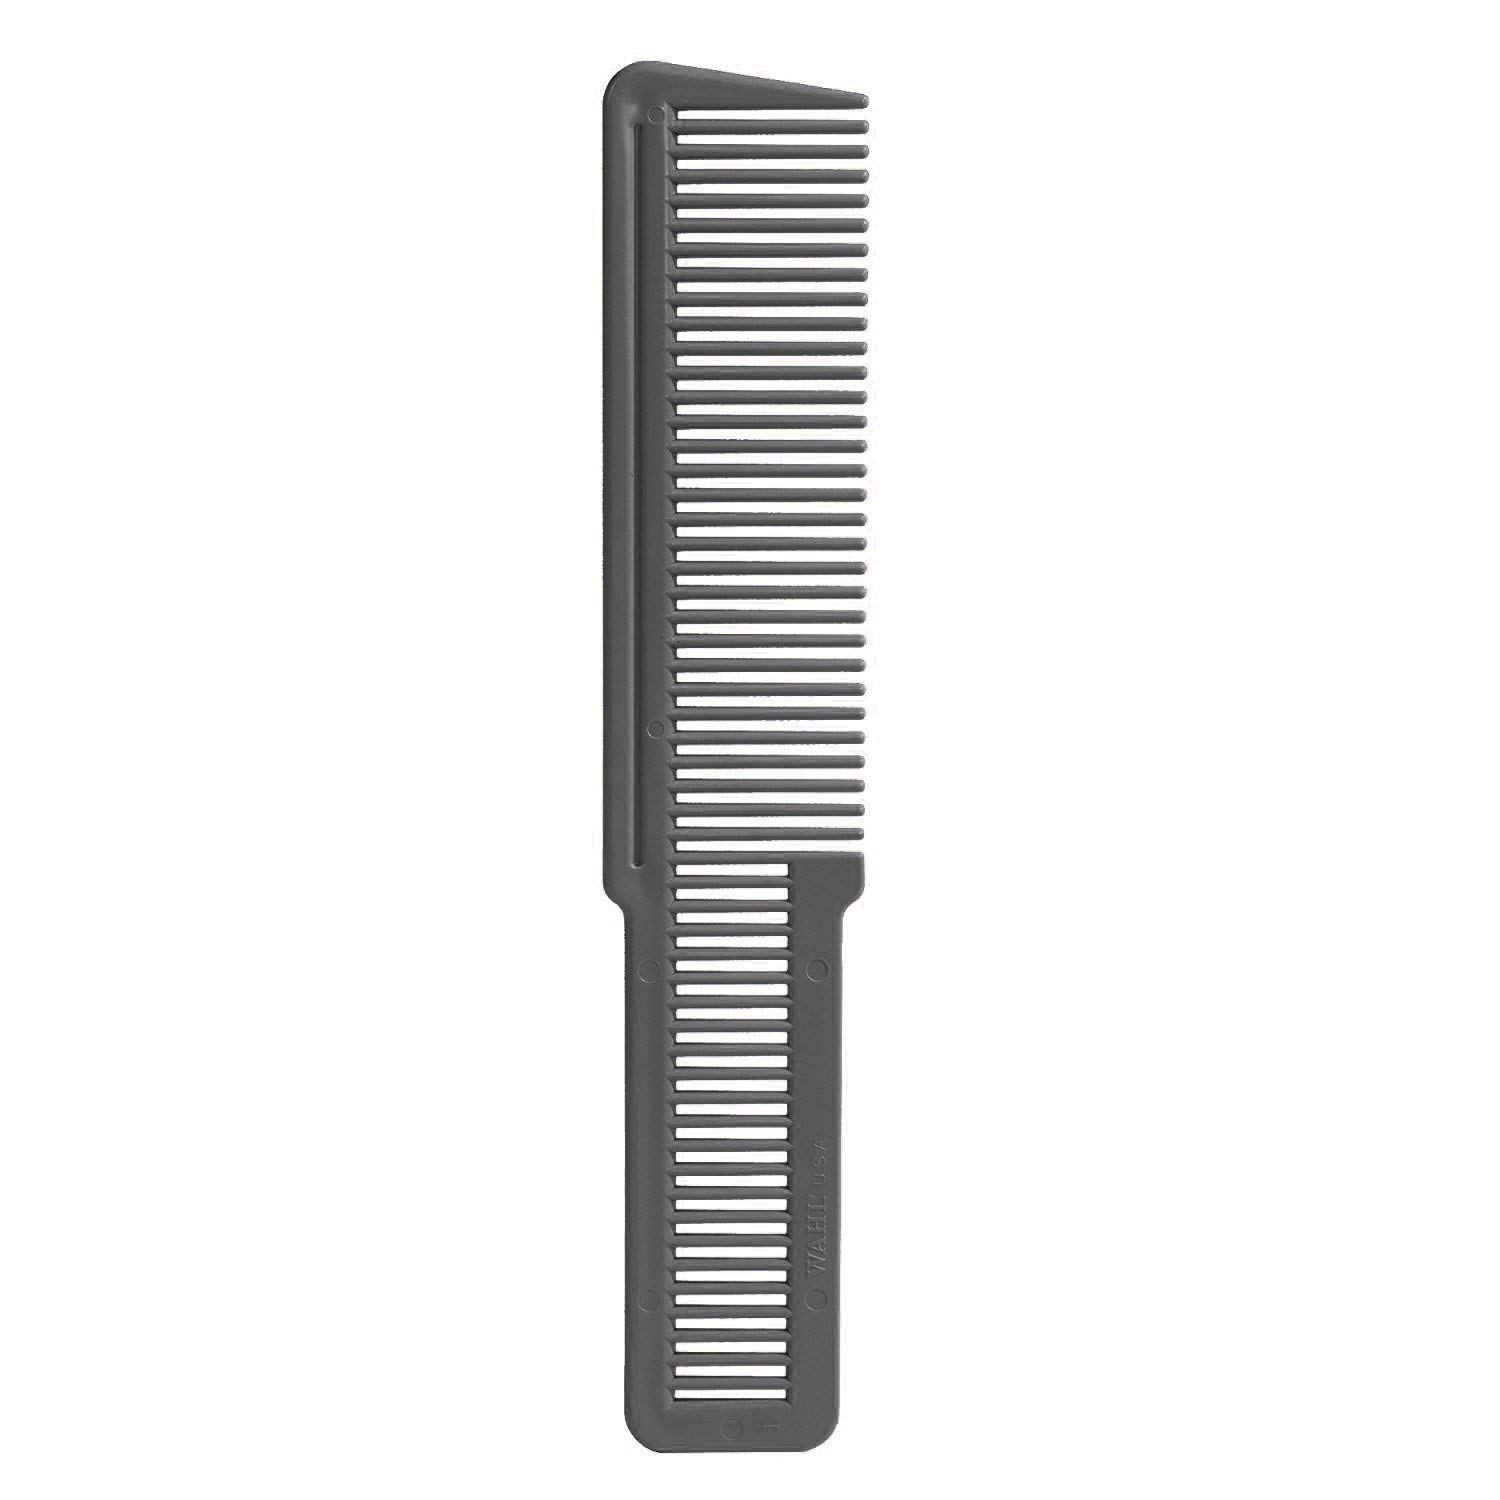 Wahl Professional 5 Star Barber Combo & Wahl Professional Large Styling Dark Grey Comb Bundle